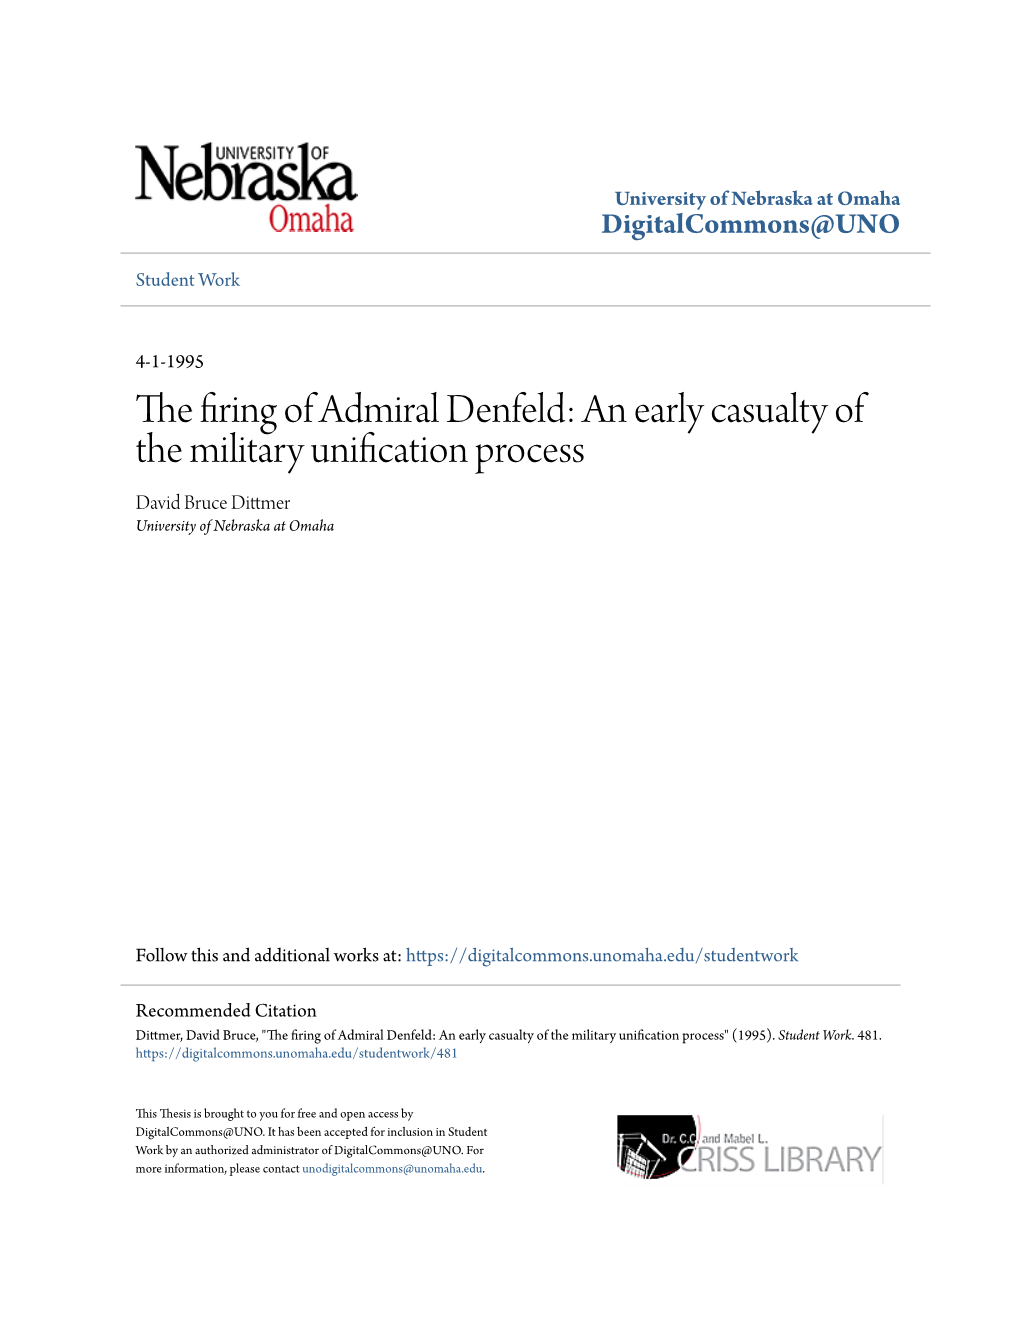 The Firing of Admiral Denfeld: an Early Casualty of the Military Unification Process David Bruce Dittmer University of Nebraska at Omaha